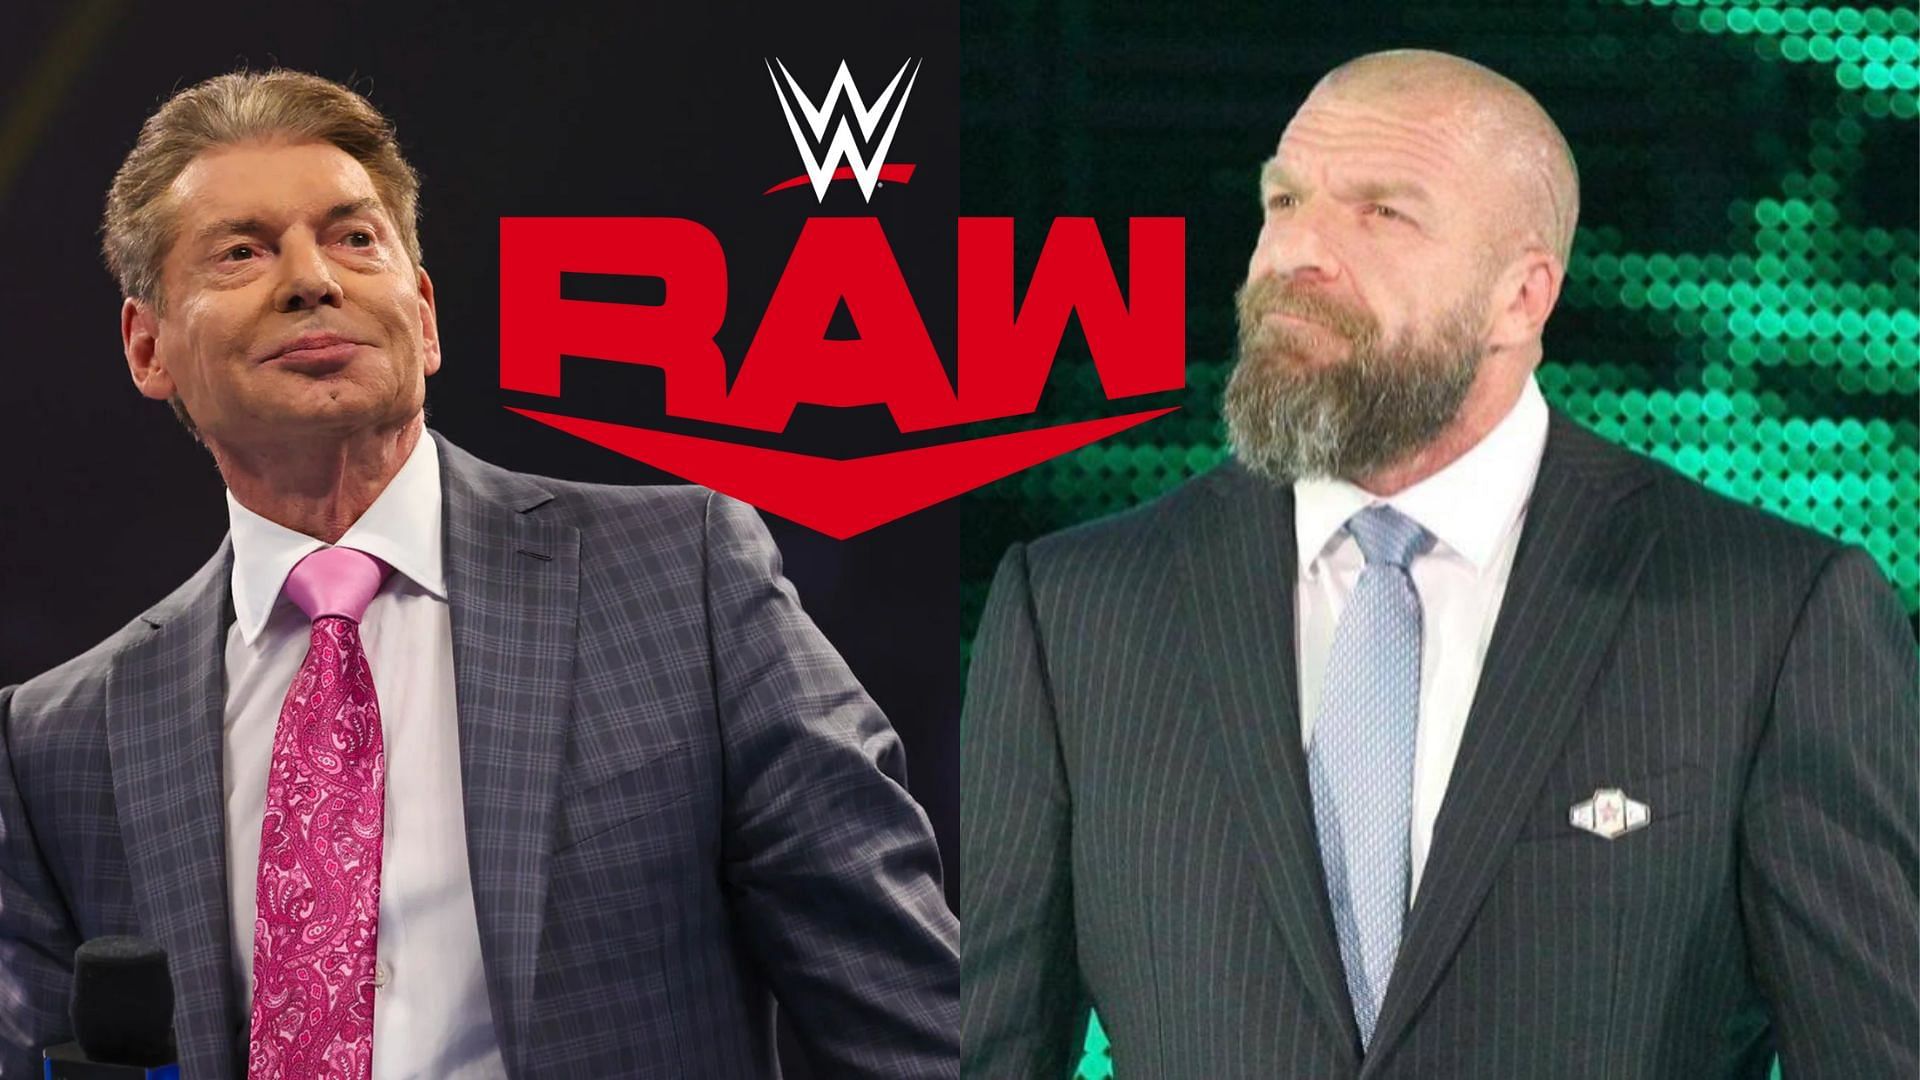 Triple H took over Vince McMahon